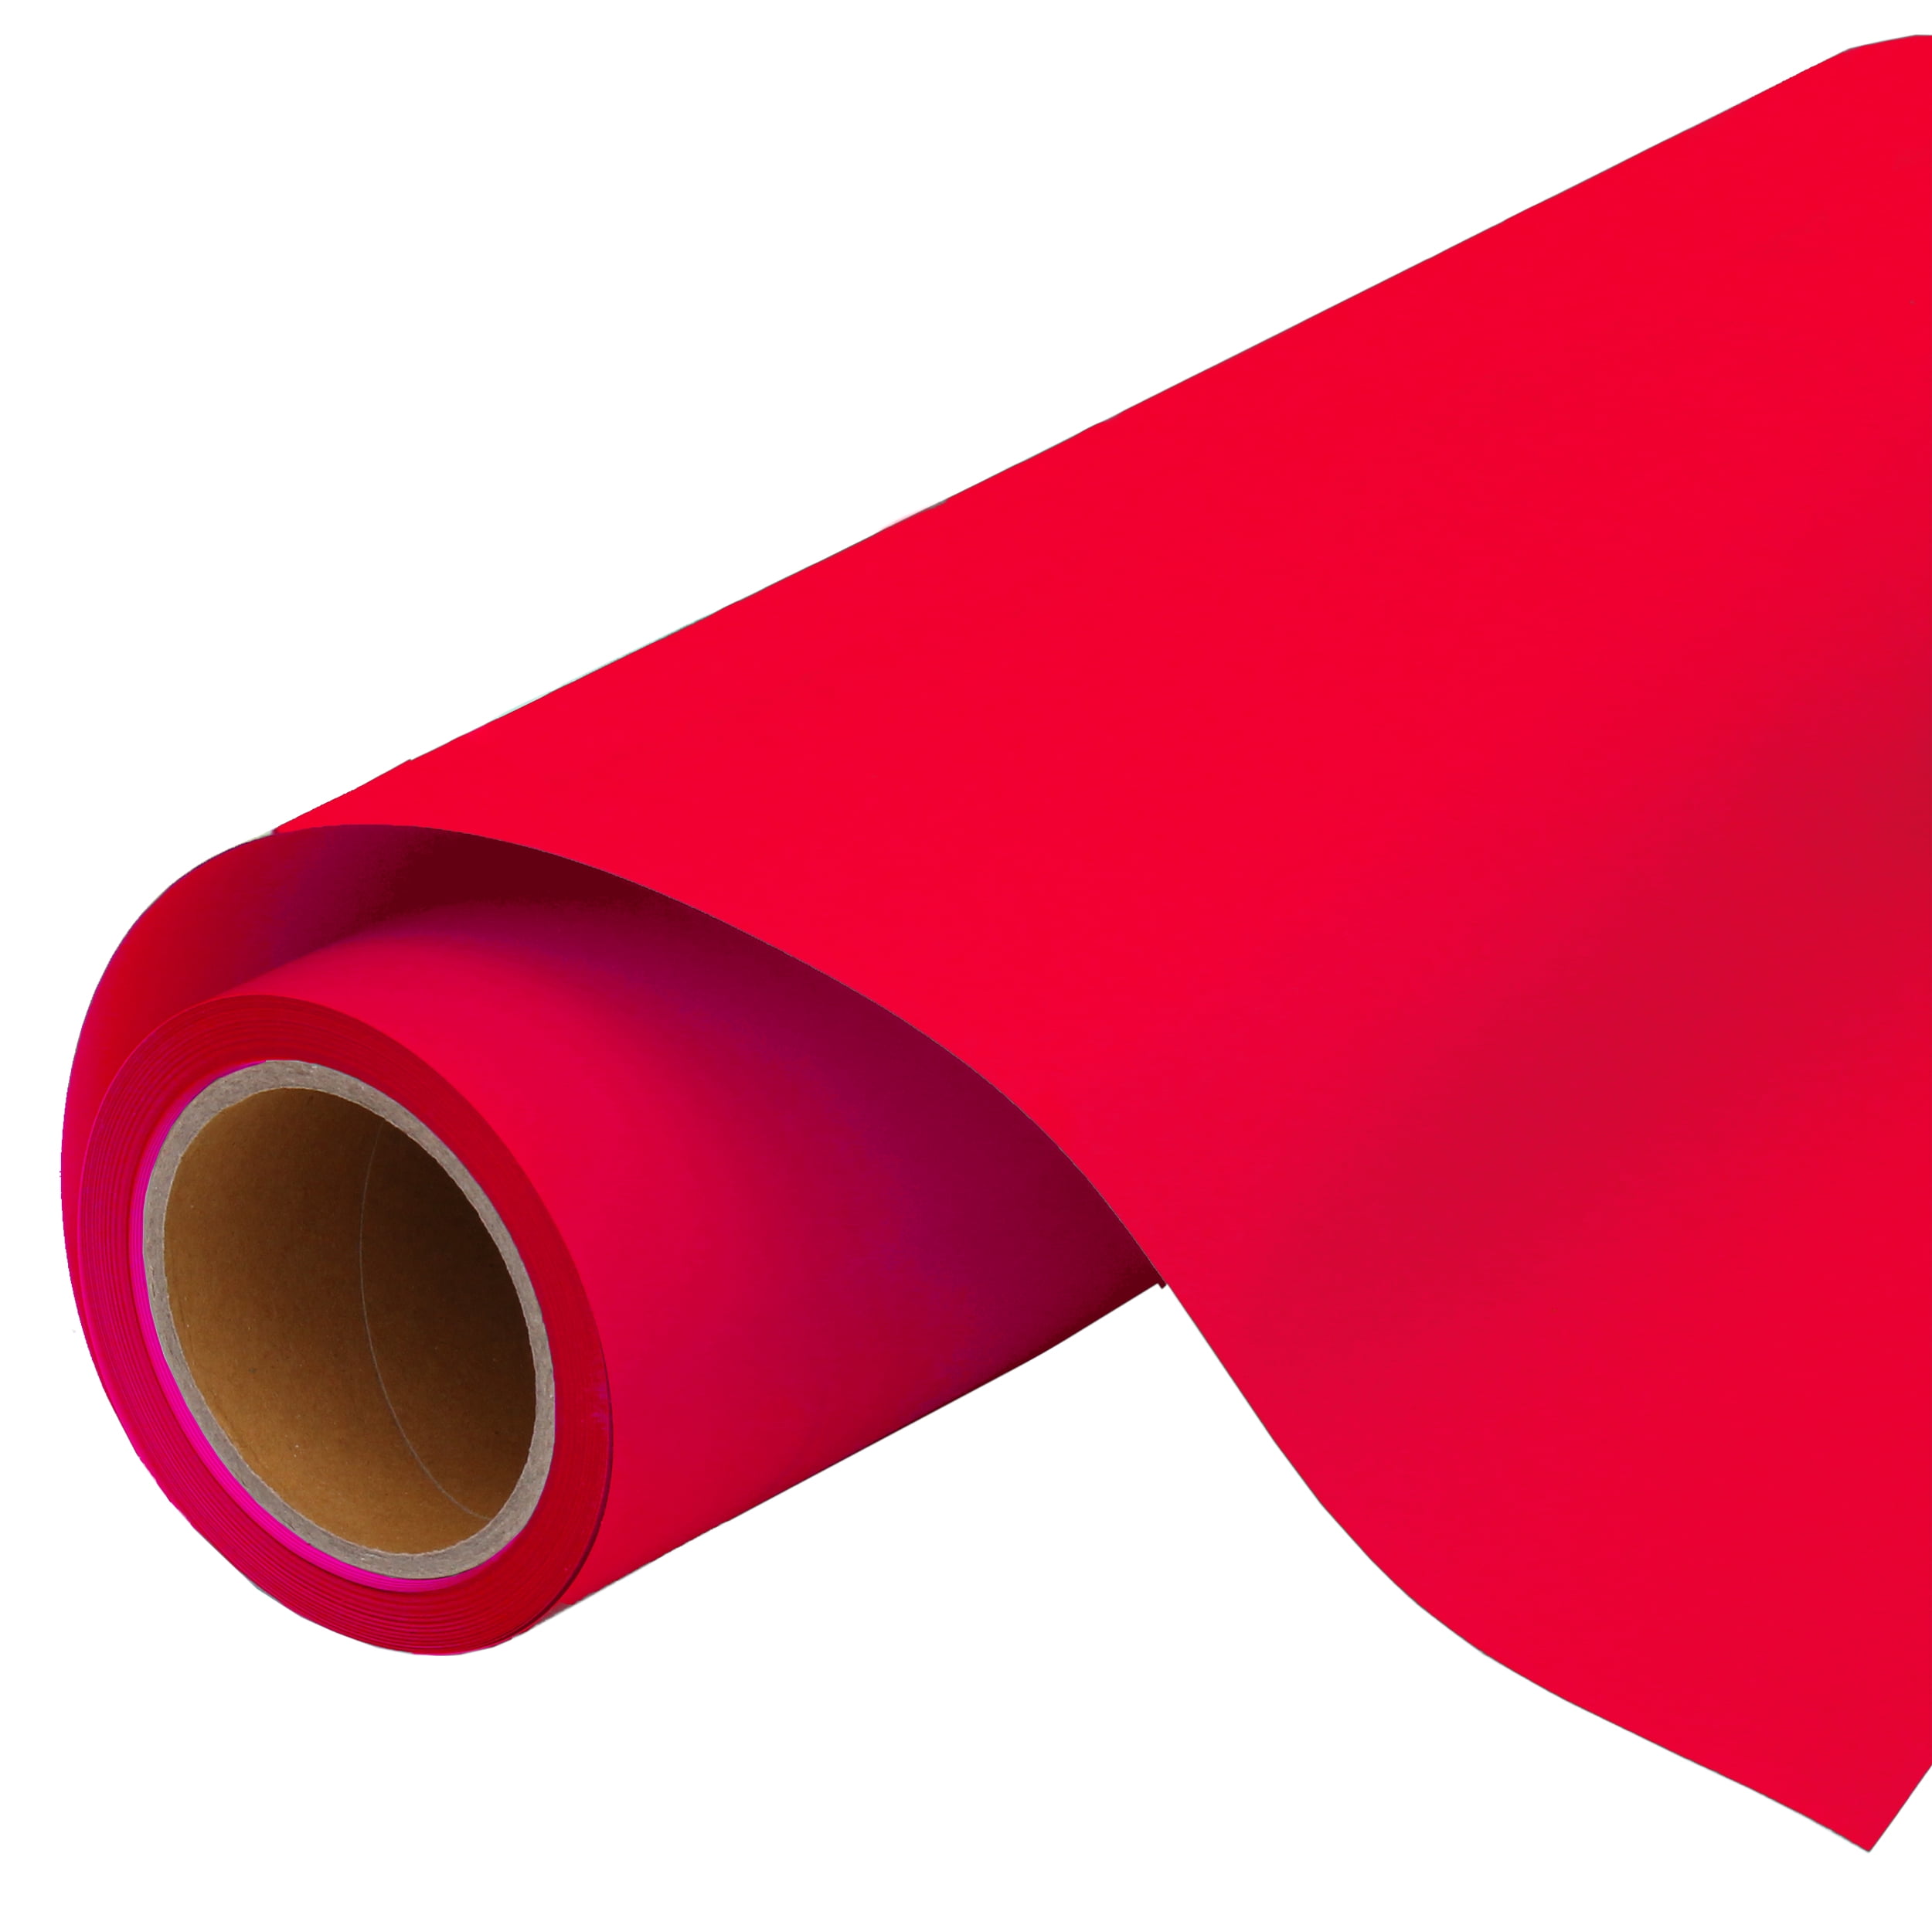 HTVRONT HTV Heat Transfer Vinyl-12 x 3FT Red HTV Vinyl Roll for T-Shirts,  Iron on Vinyl for Cricut, Cameo & Heat Press Machine- Easy to Cut & Weed  Vinyl Heat Transfer (Red)